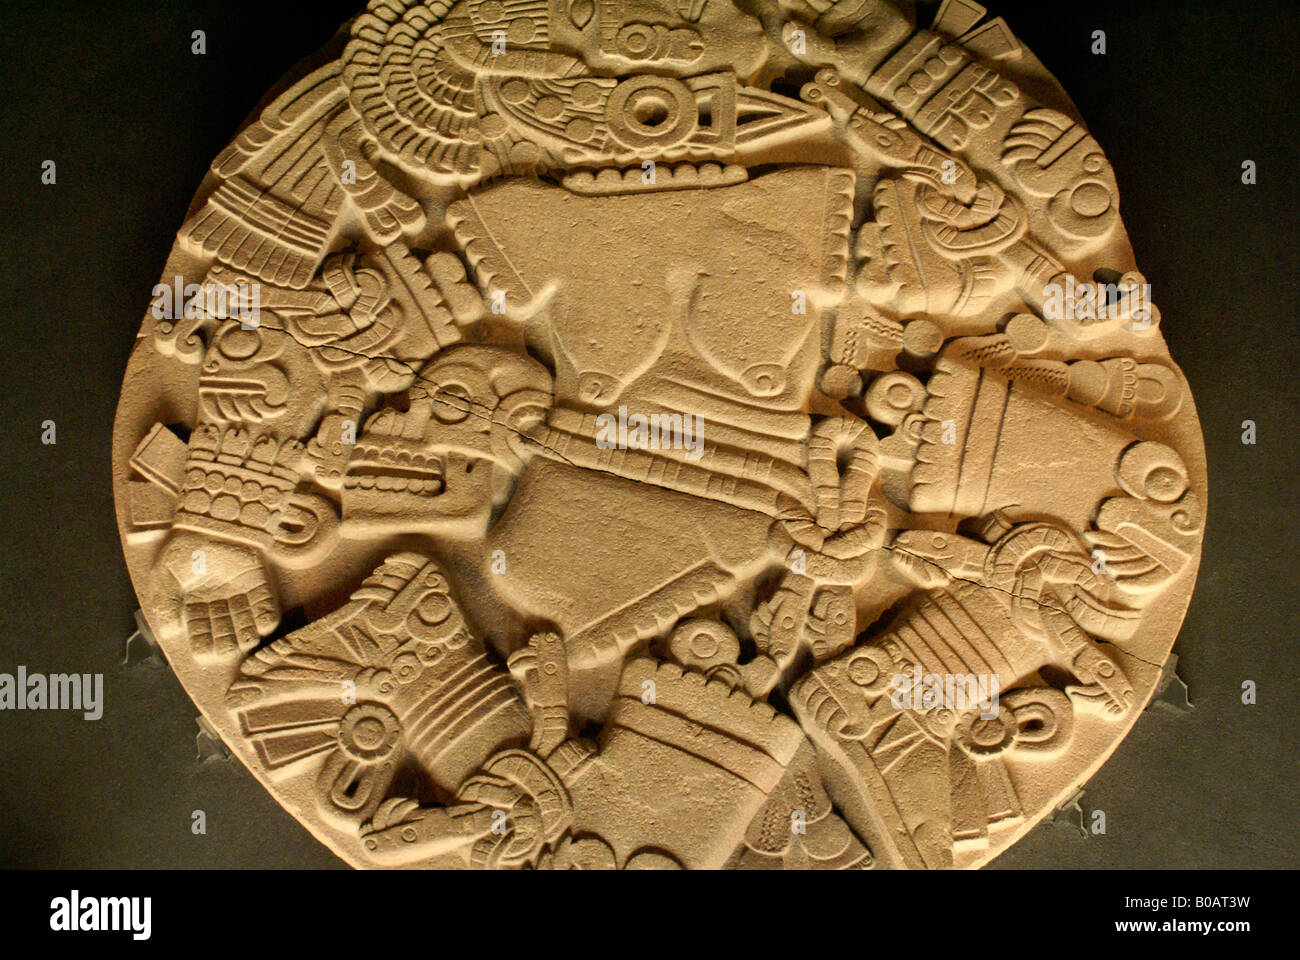 Circular stone depicting the dismembered Aztec moon goddess Coyolxauhqui, Museo del Templo Mayor, Mexico City Stock Photo